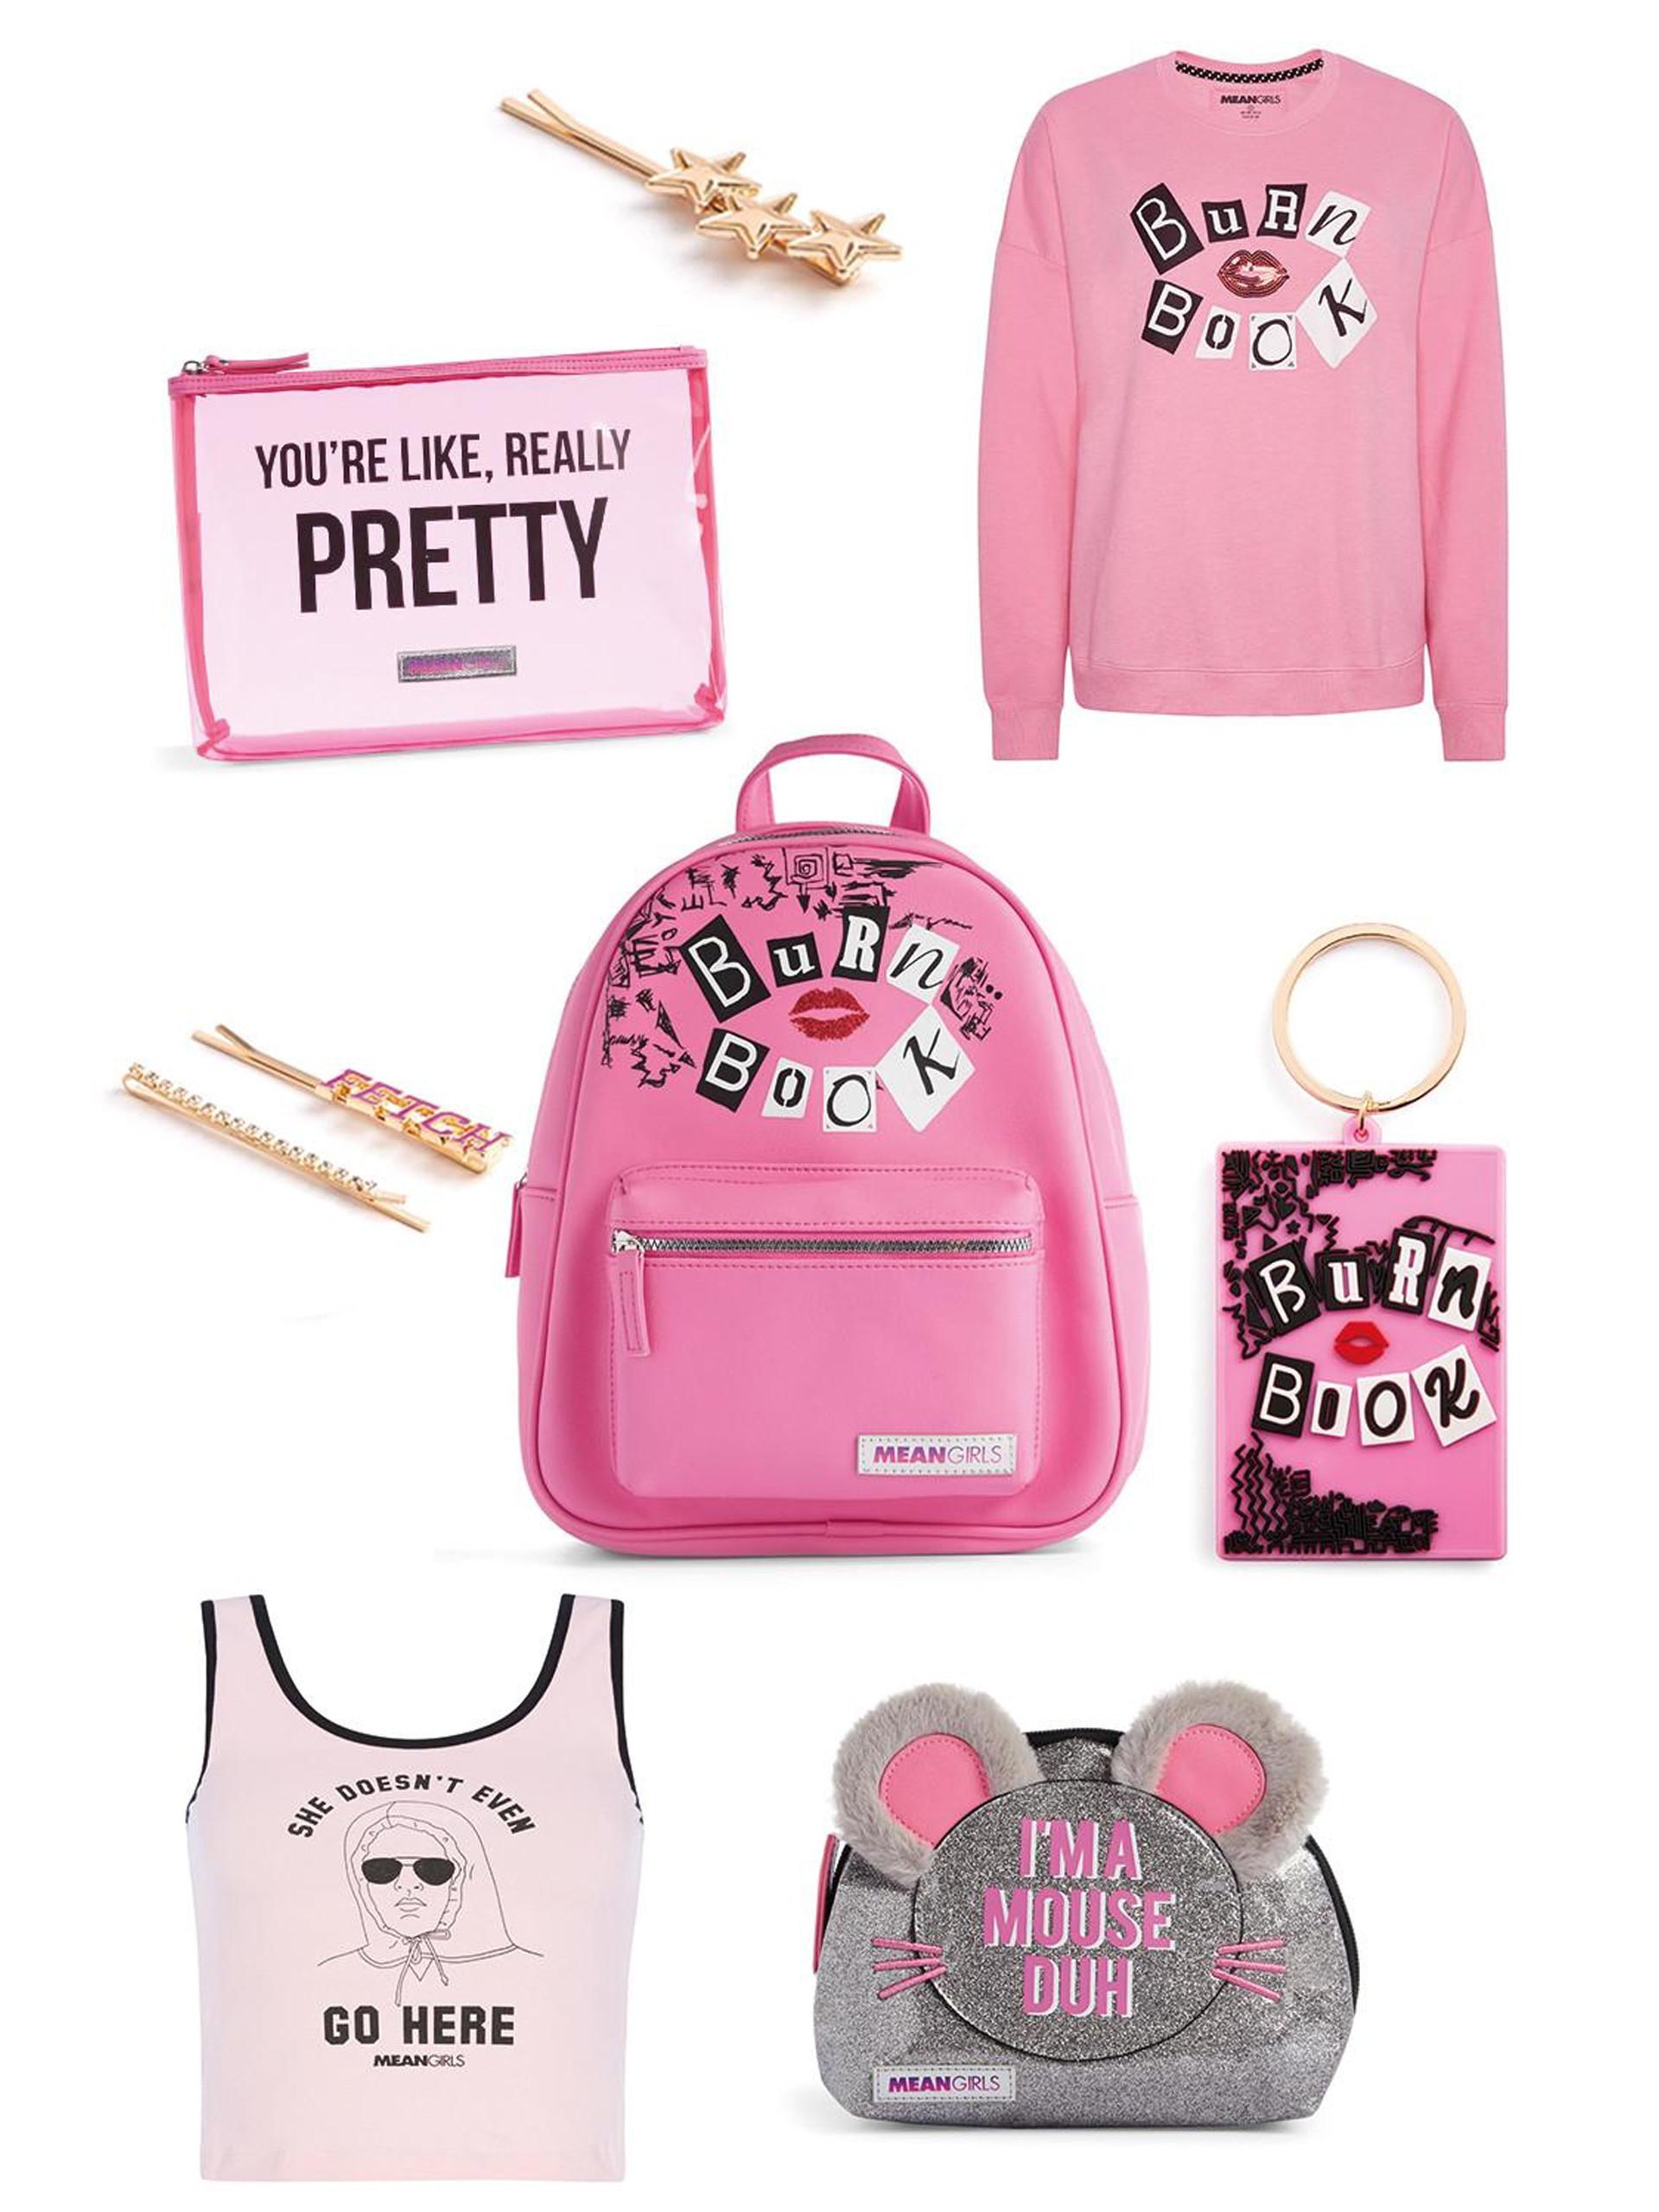 Primark Launches Mean Girls Pyjamas and They're SO Fetch